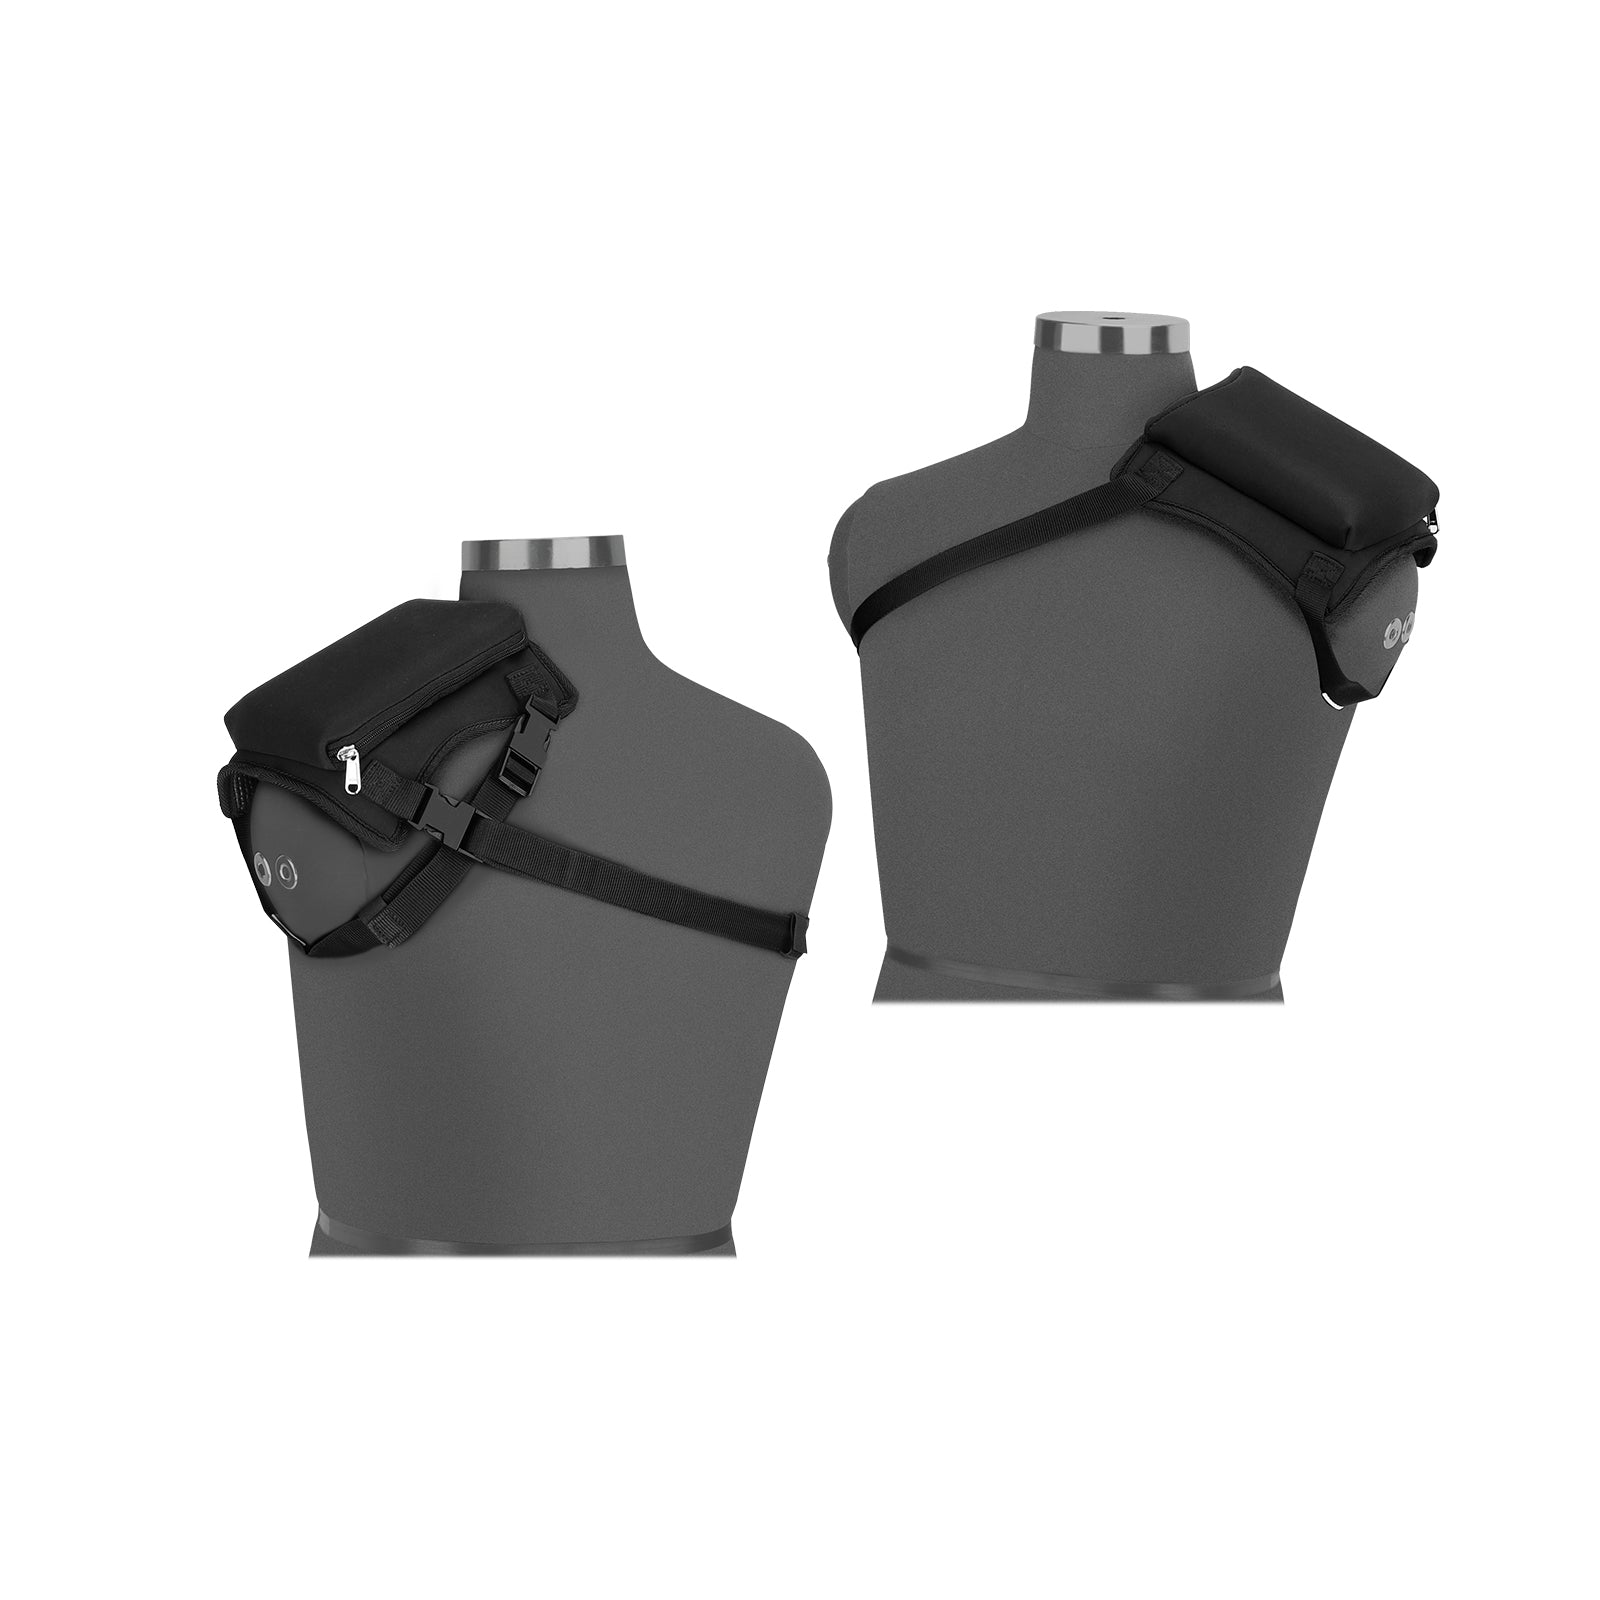 Quality waterproof shoulder pads For Maximizing Safety 